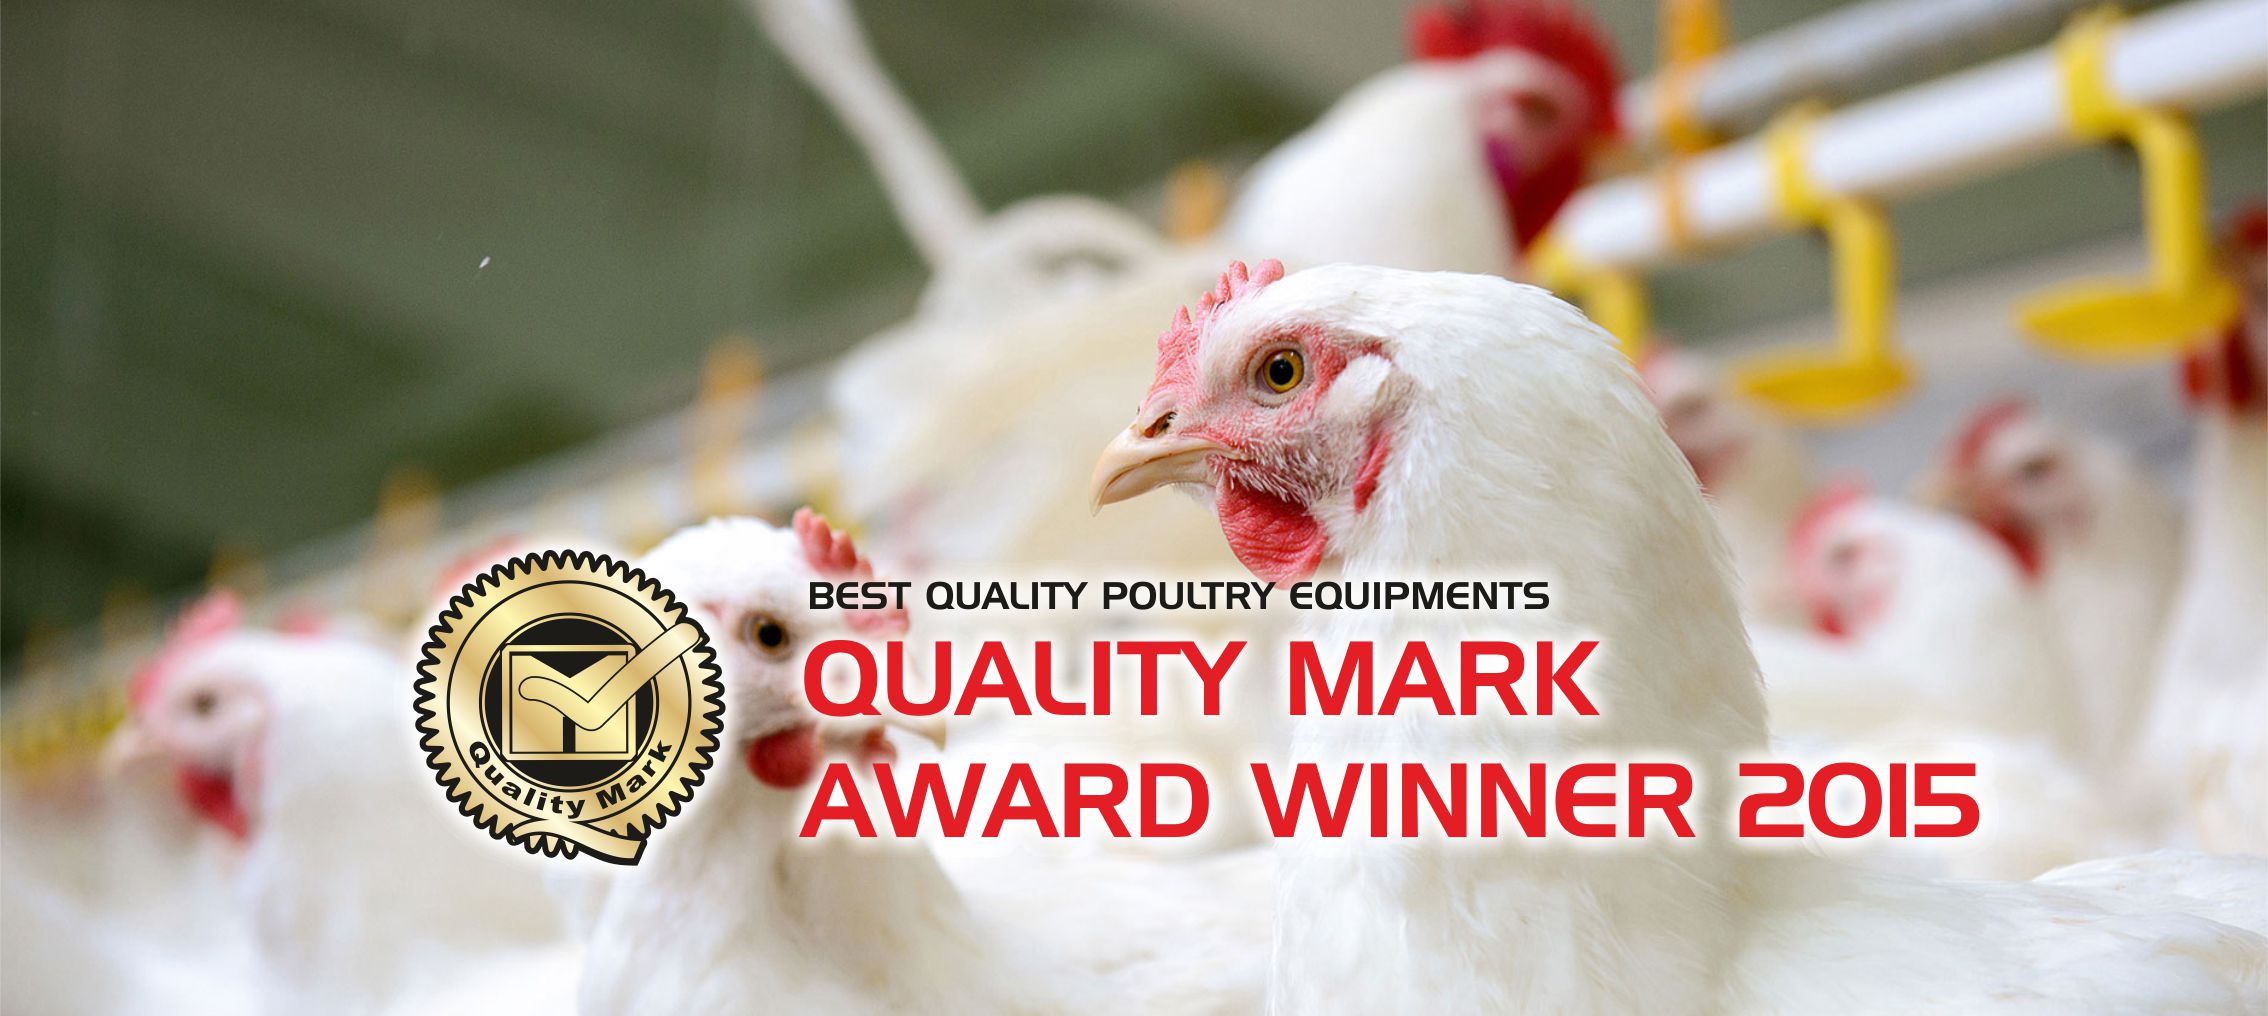 Best Quality Poultry Equipments